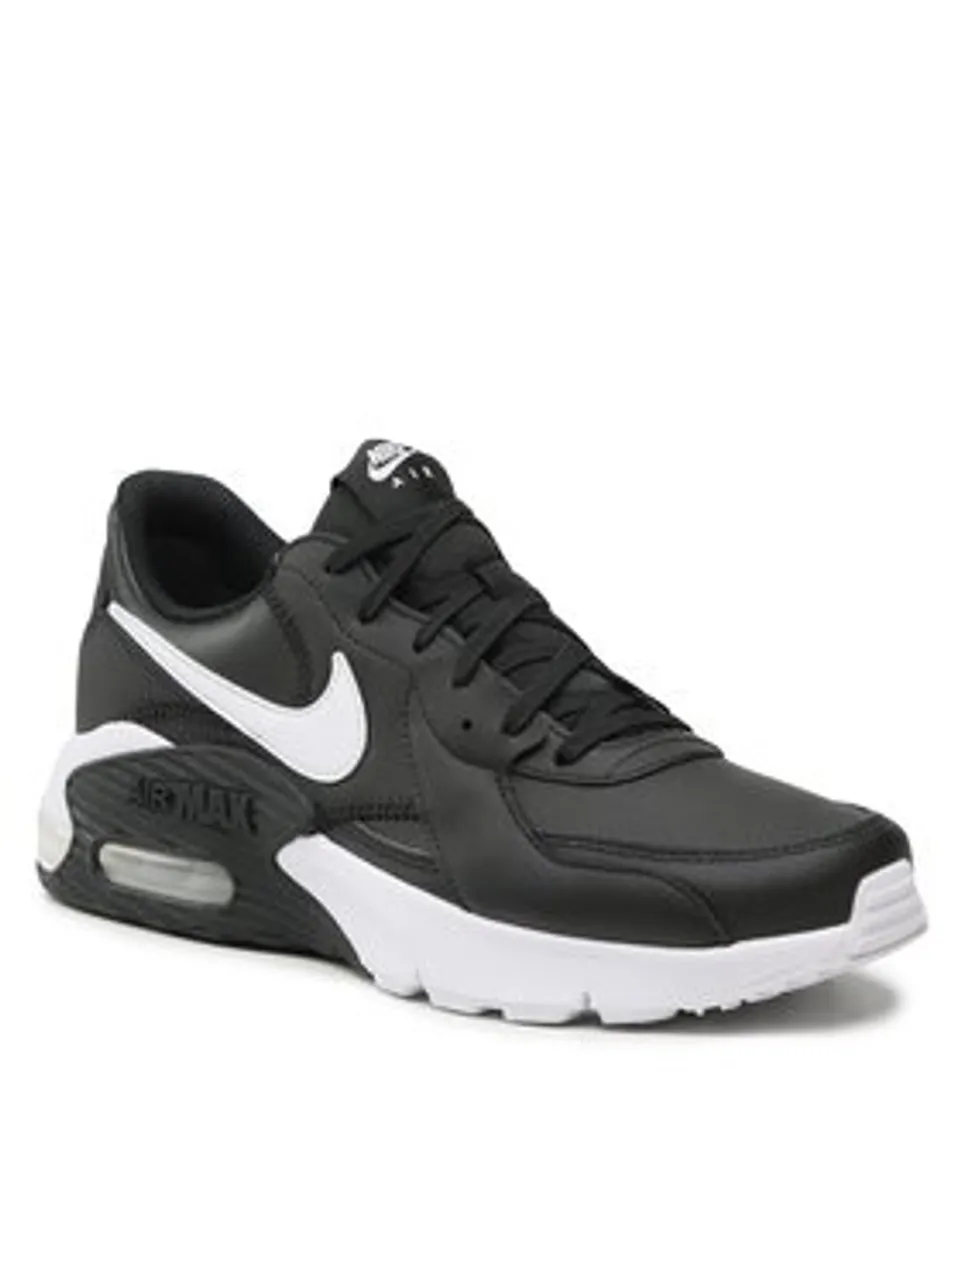 Nike Schuhe Air Max Excee Leather DB2839 002 Schwarz